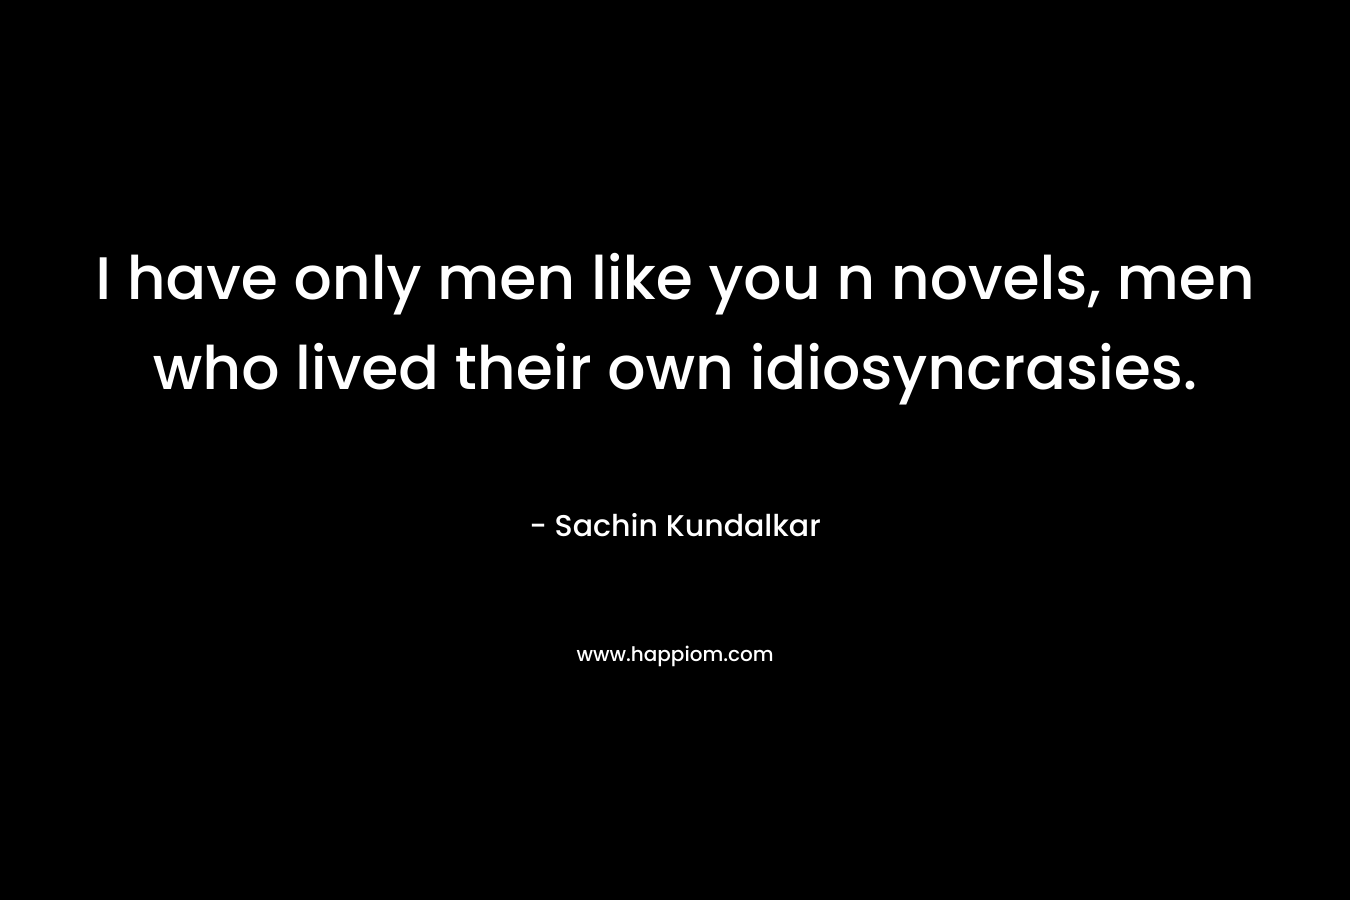 I have only men like you n novels, men who lived their own idiosyncrasies.